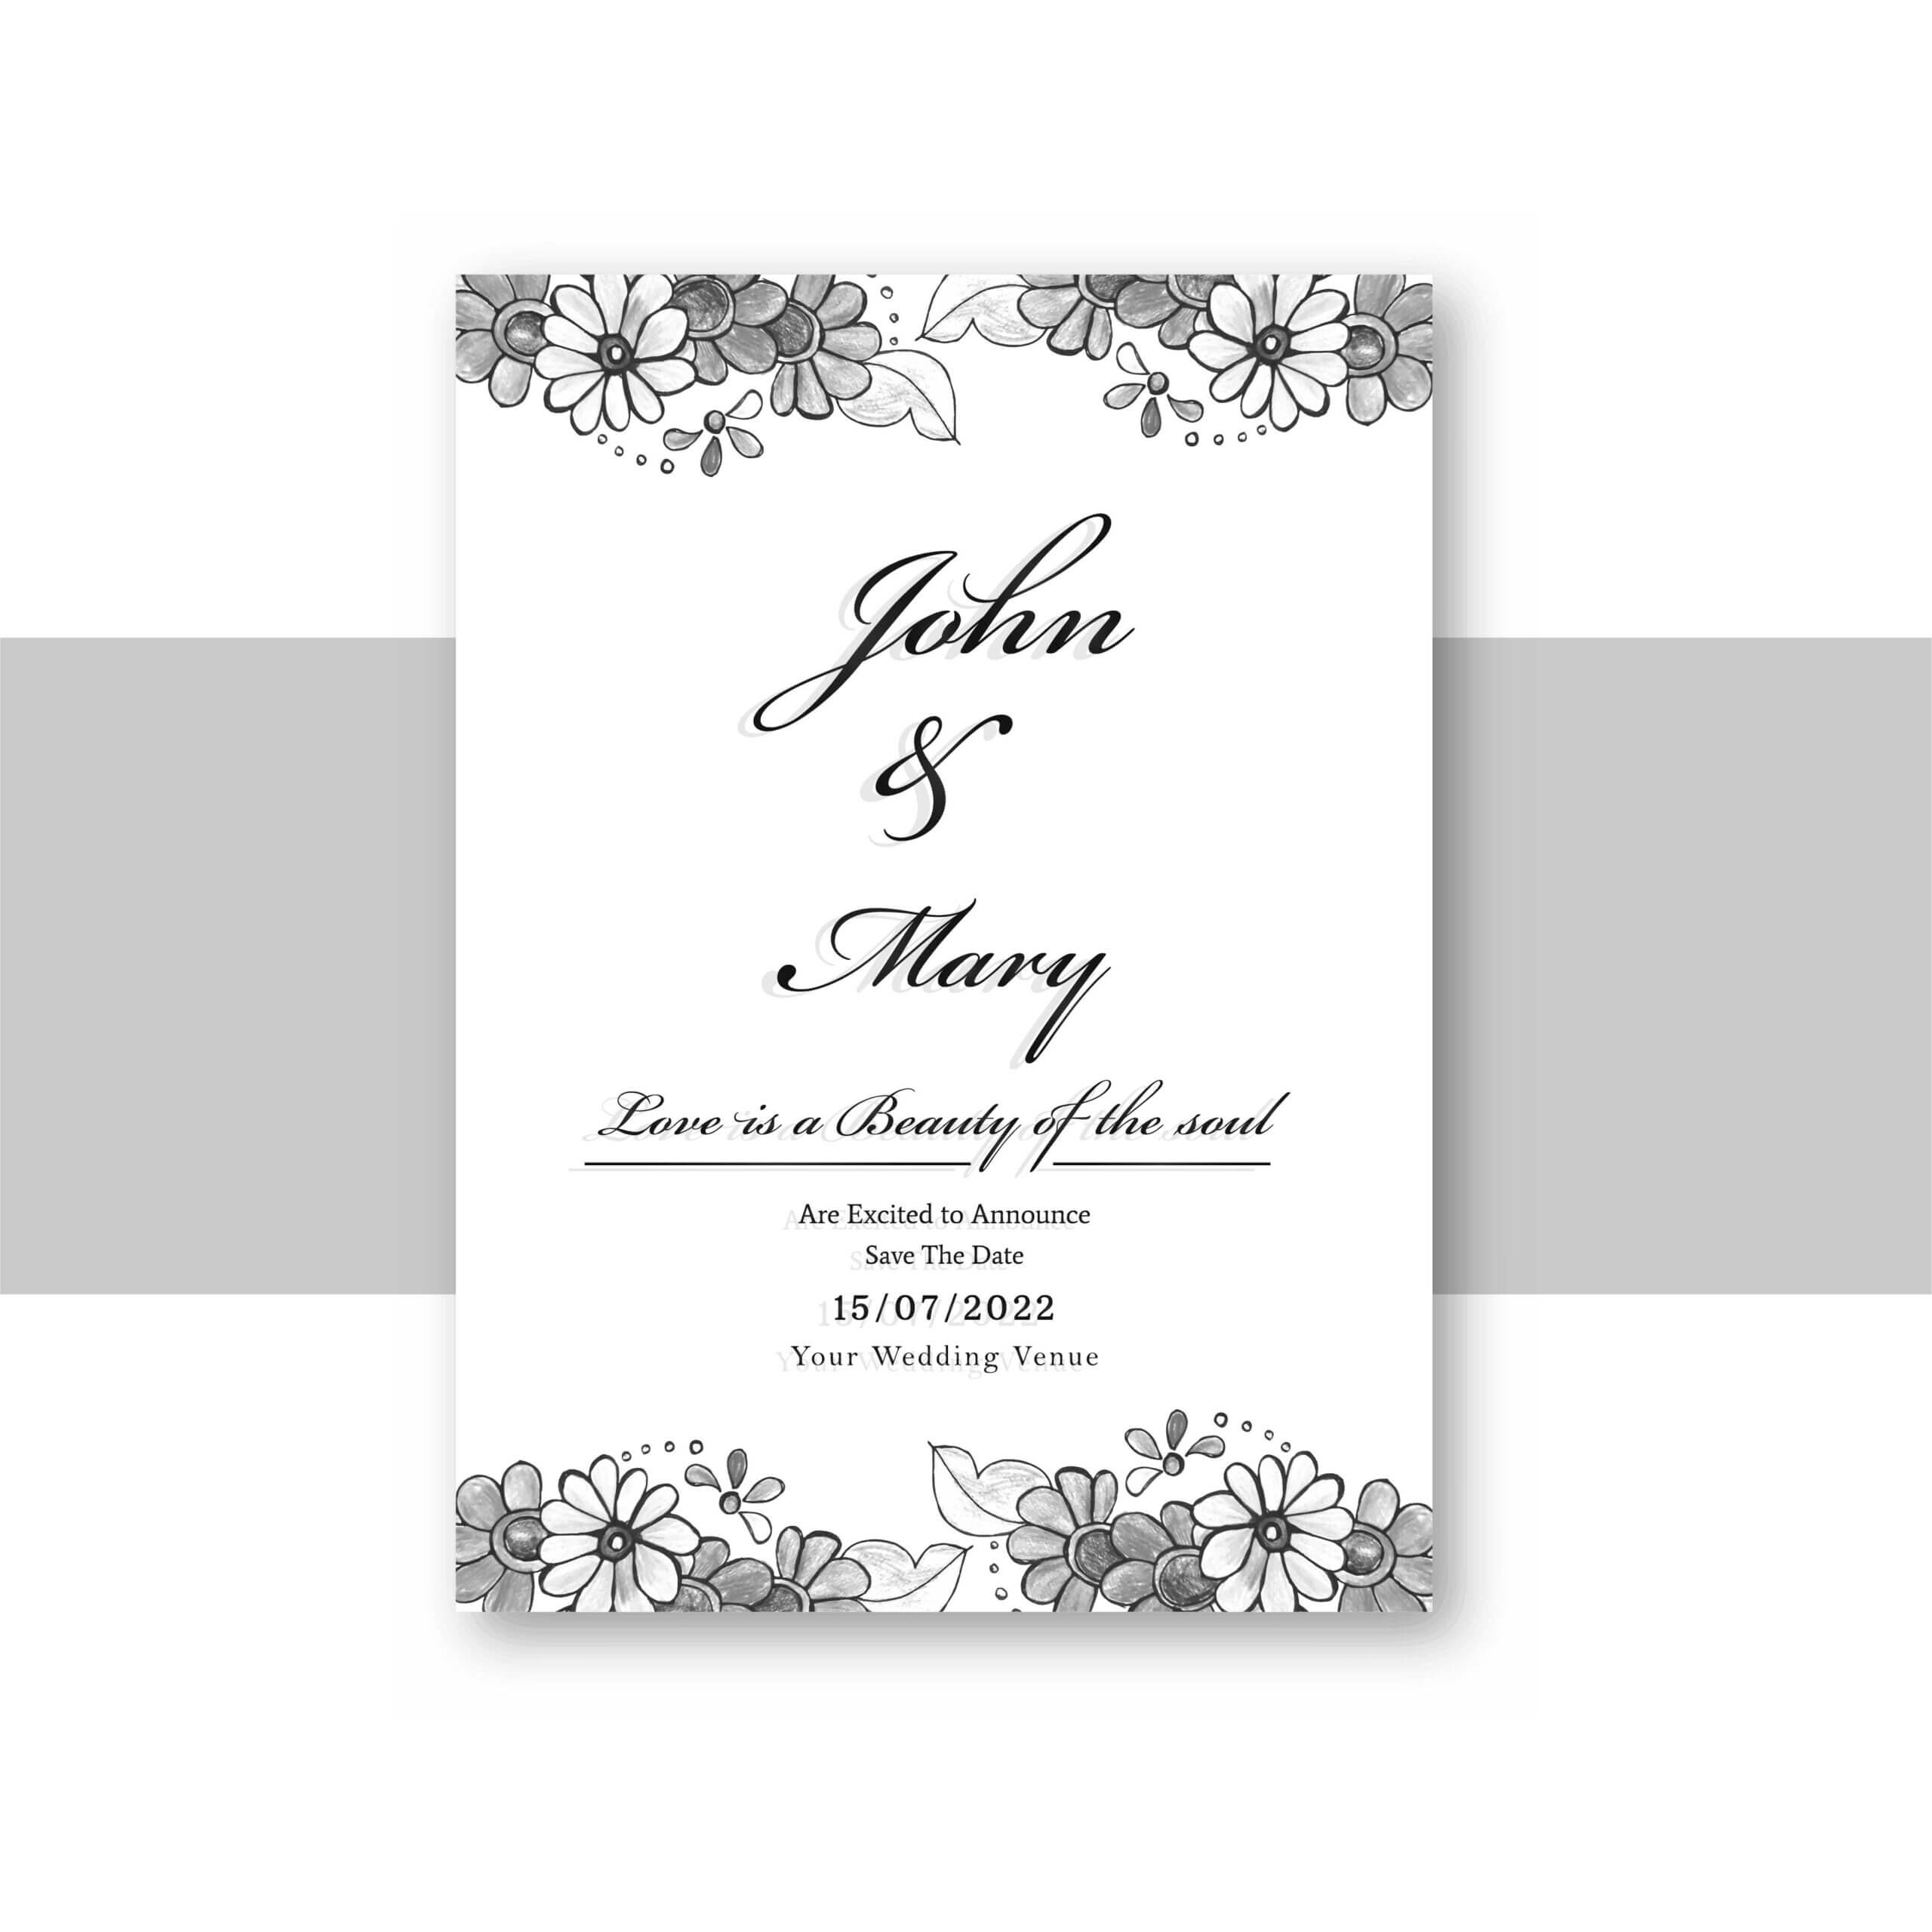 Beautiful Wedding Invitation Card Template With Decorative Throughout Invitation Cards Templates For Marriage